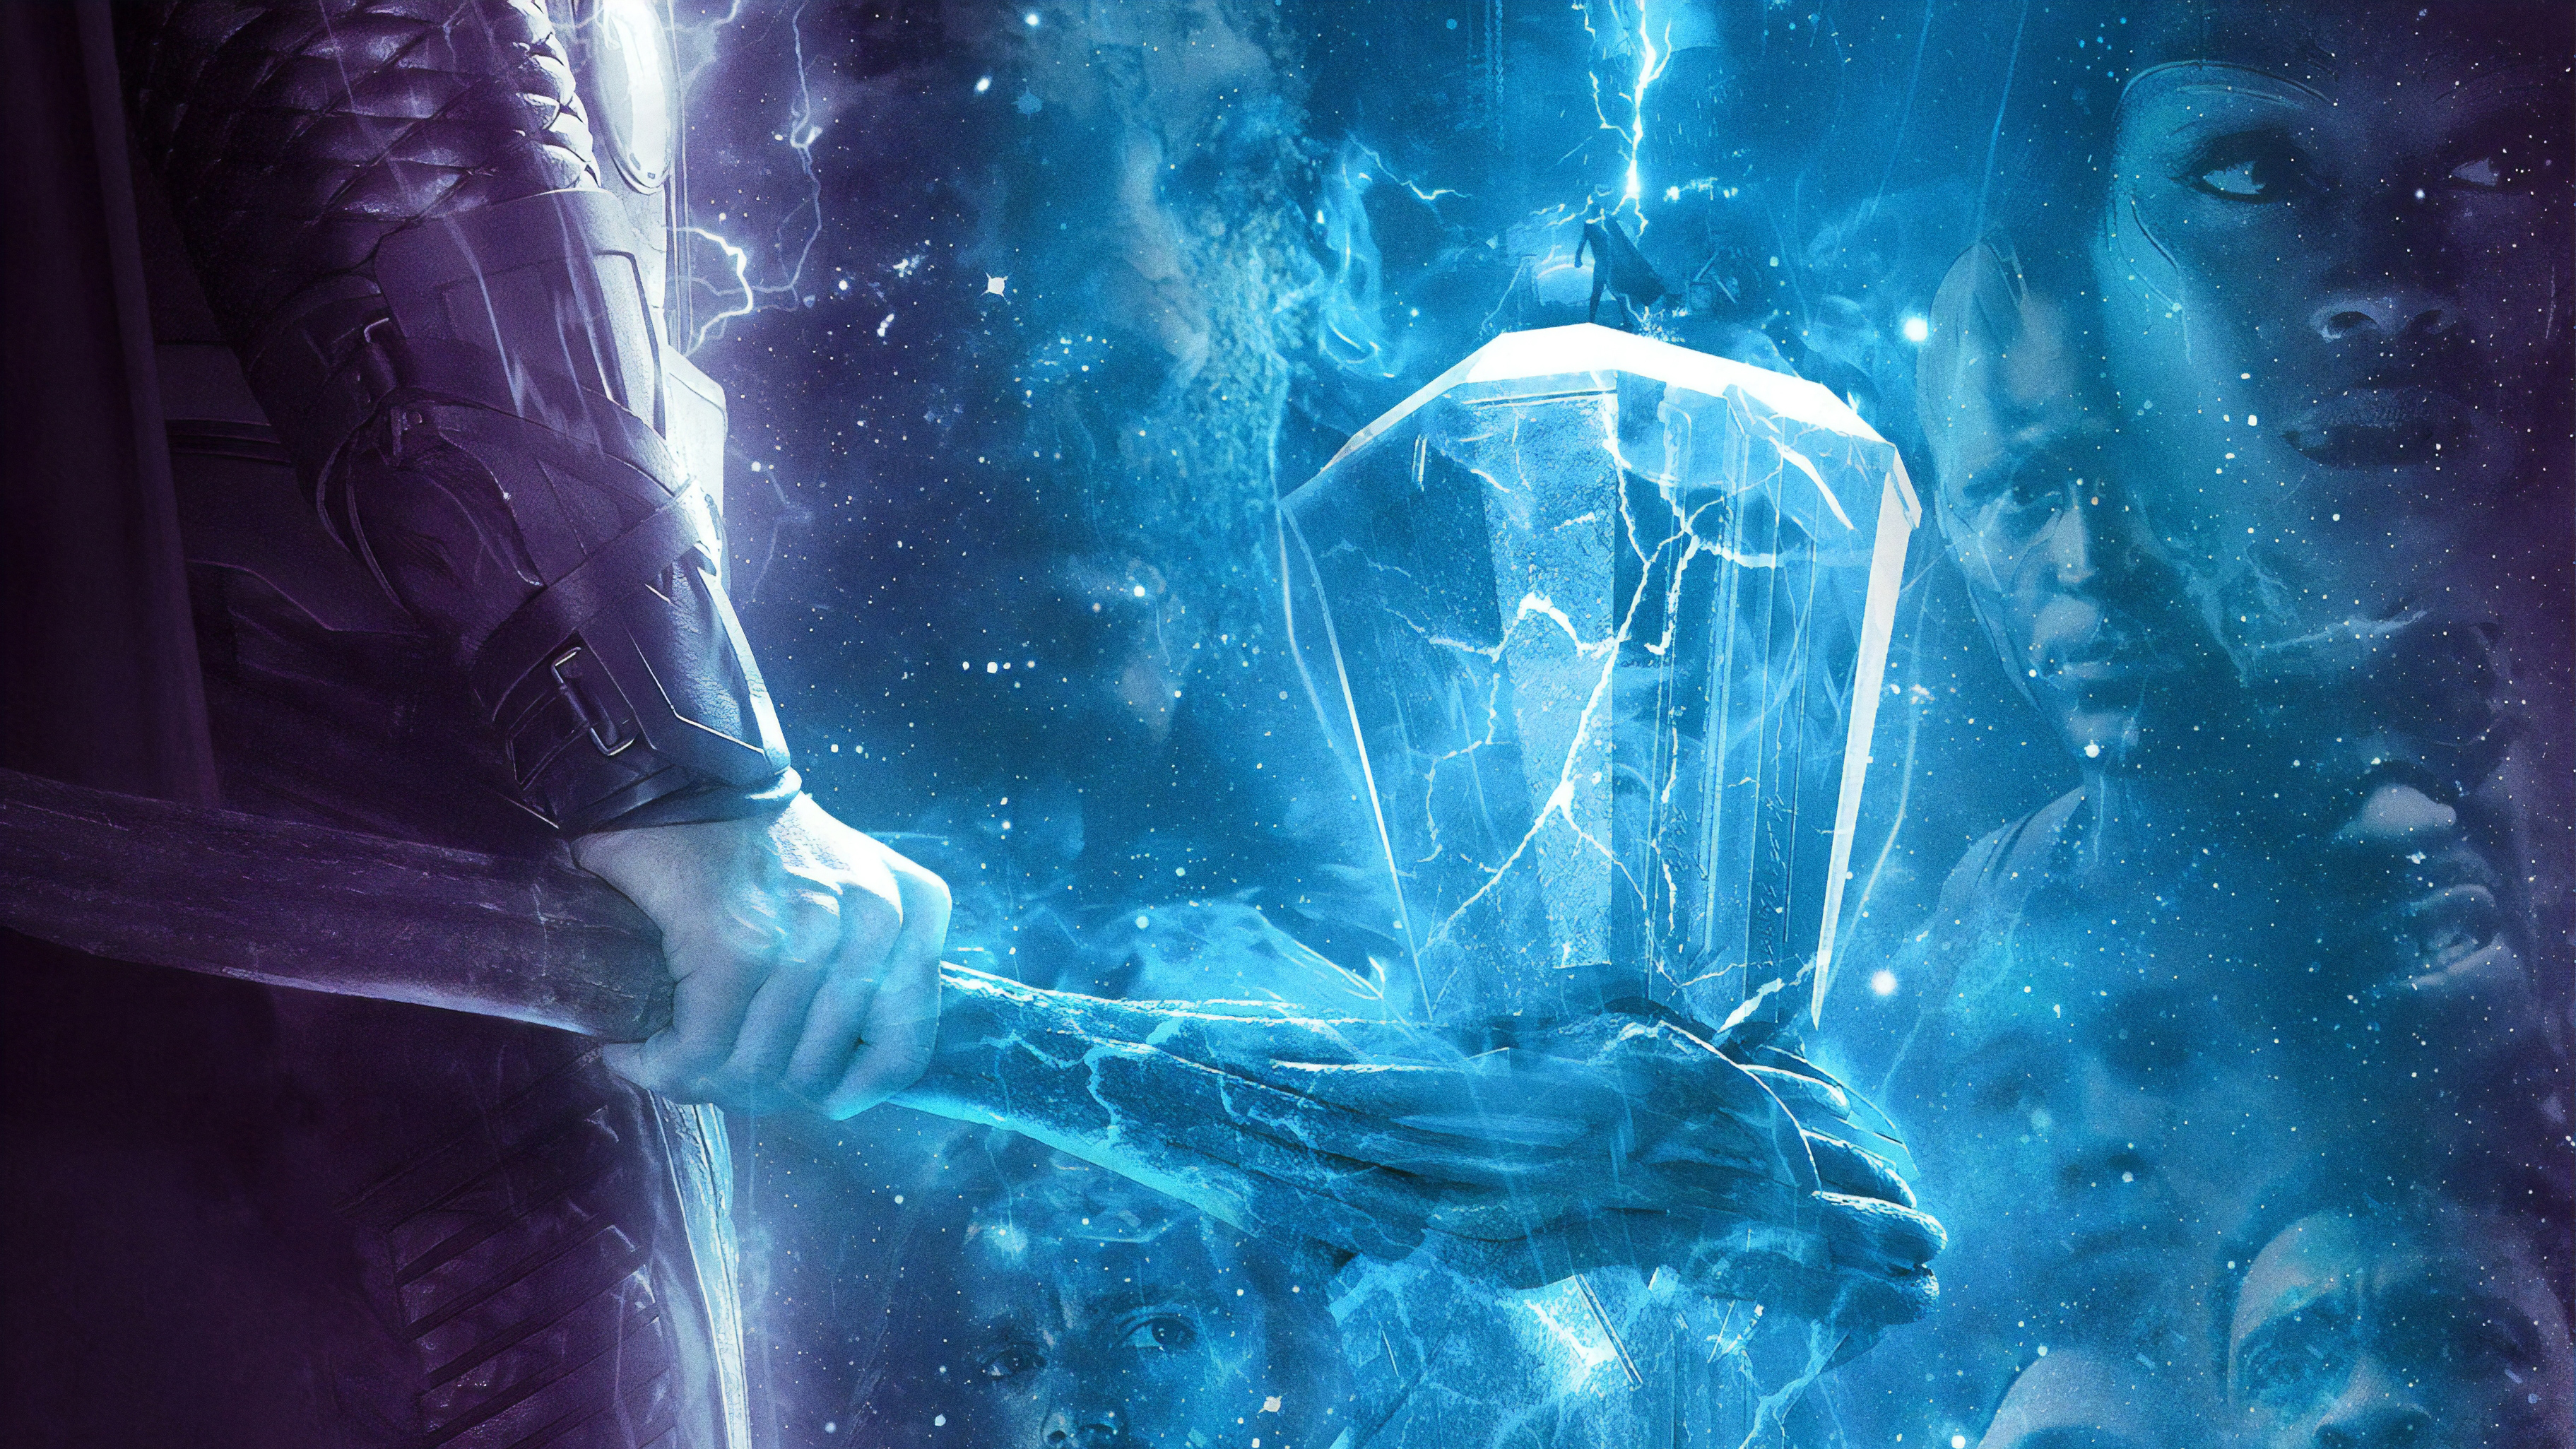 3646x2051 2560x1440 Avengers Endgame Thor Hammer Poster 4k 1440P Resolution HD 4k Wallpapers, Images, Backgrounds, Photos and Pictures